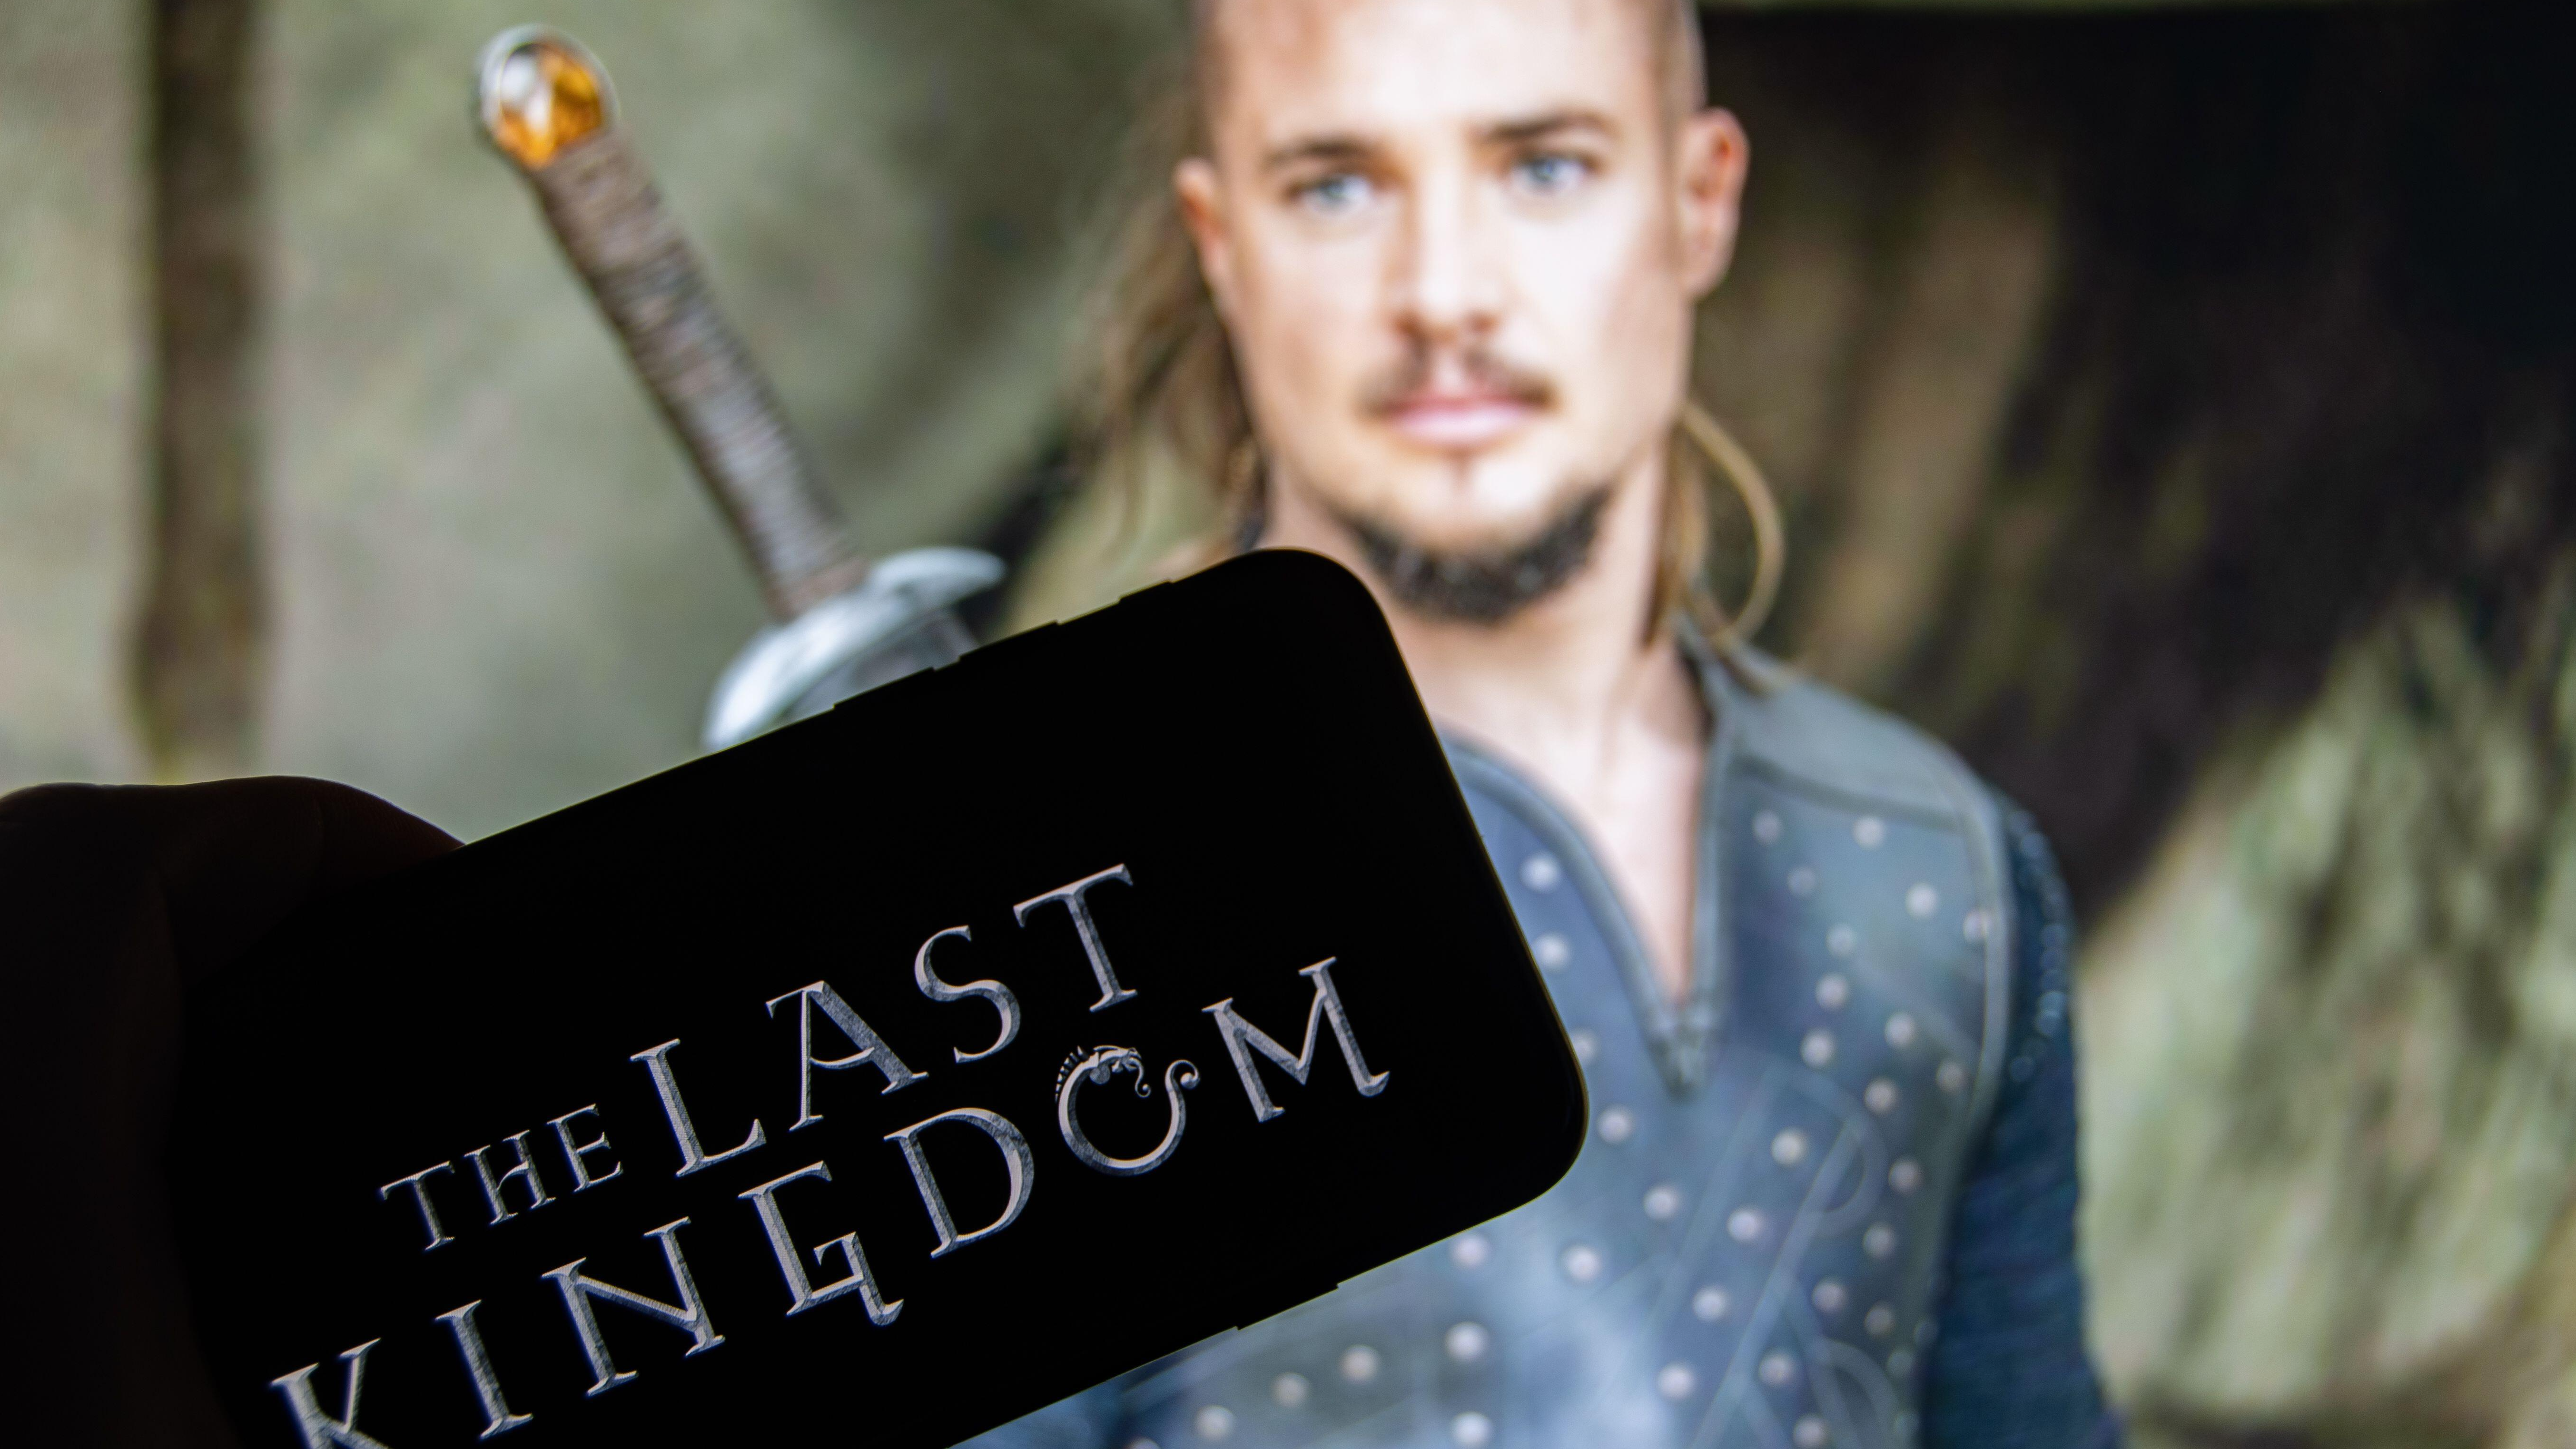 Why The Last Kingdom was cancelled - and the chances of season 6